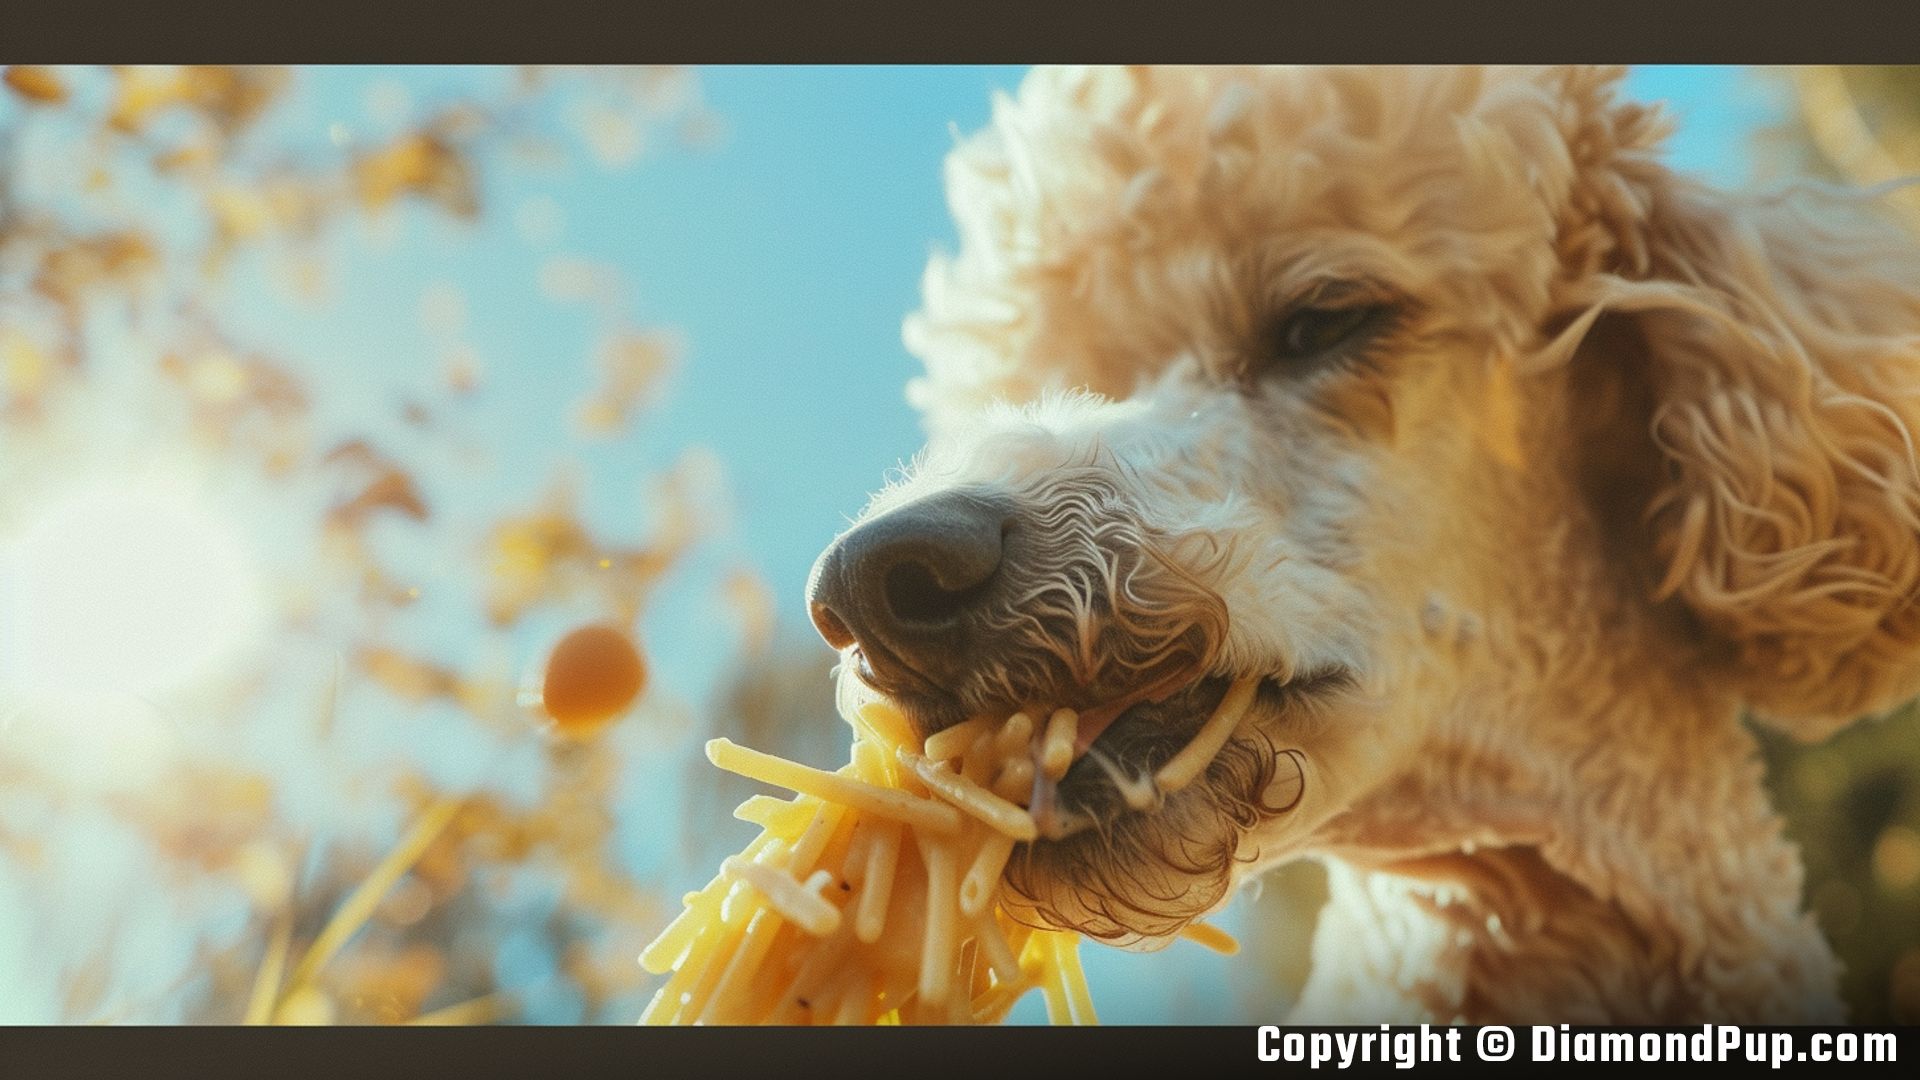 Photograph of an Adorable Poodle Eating Pasta